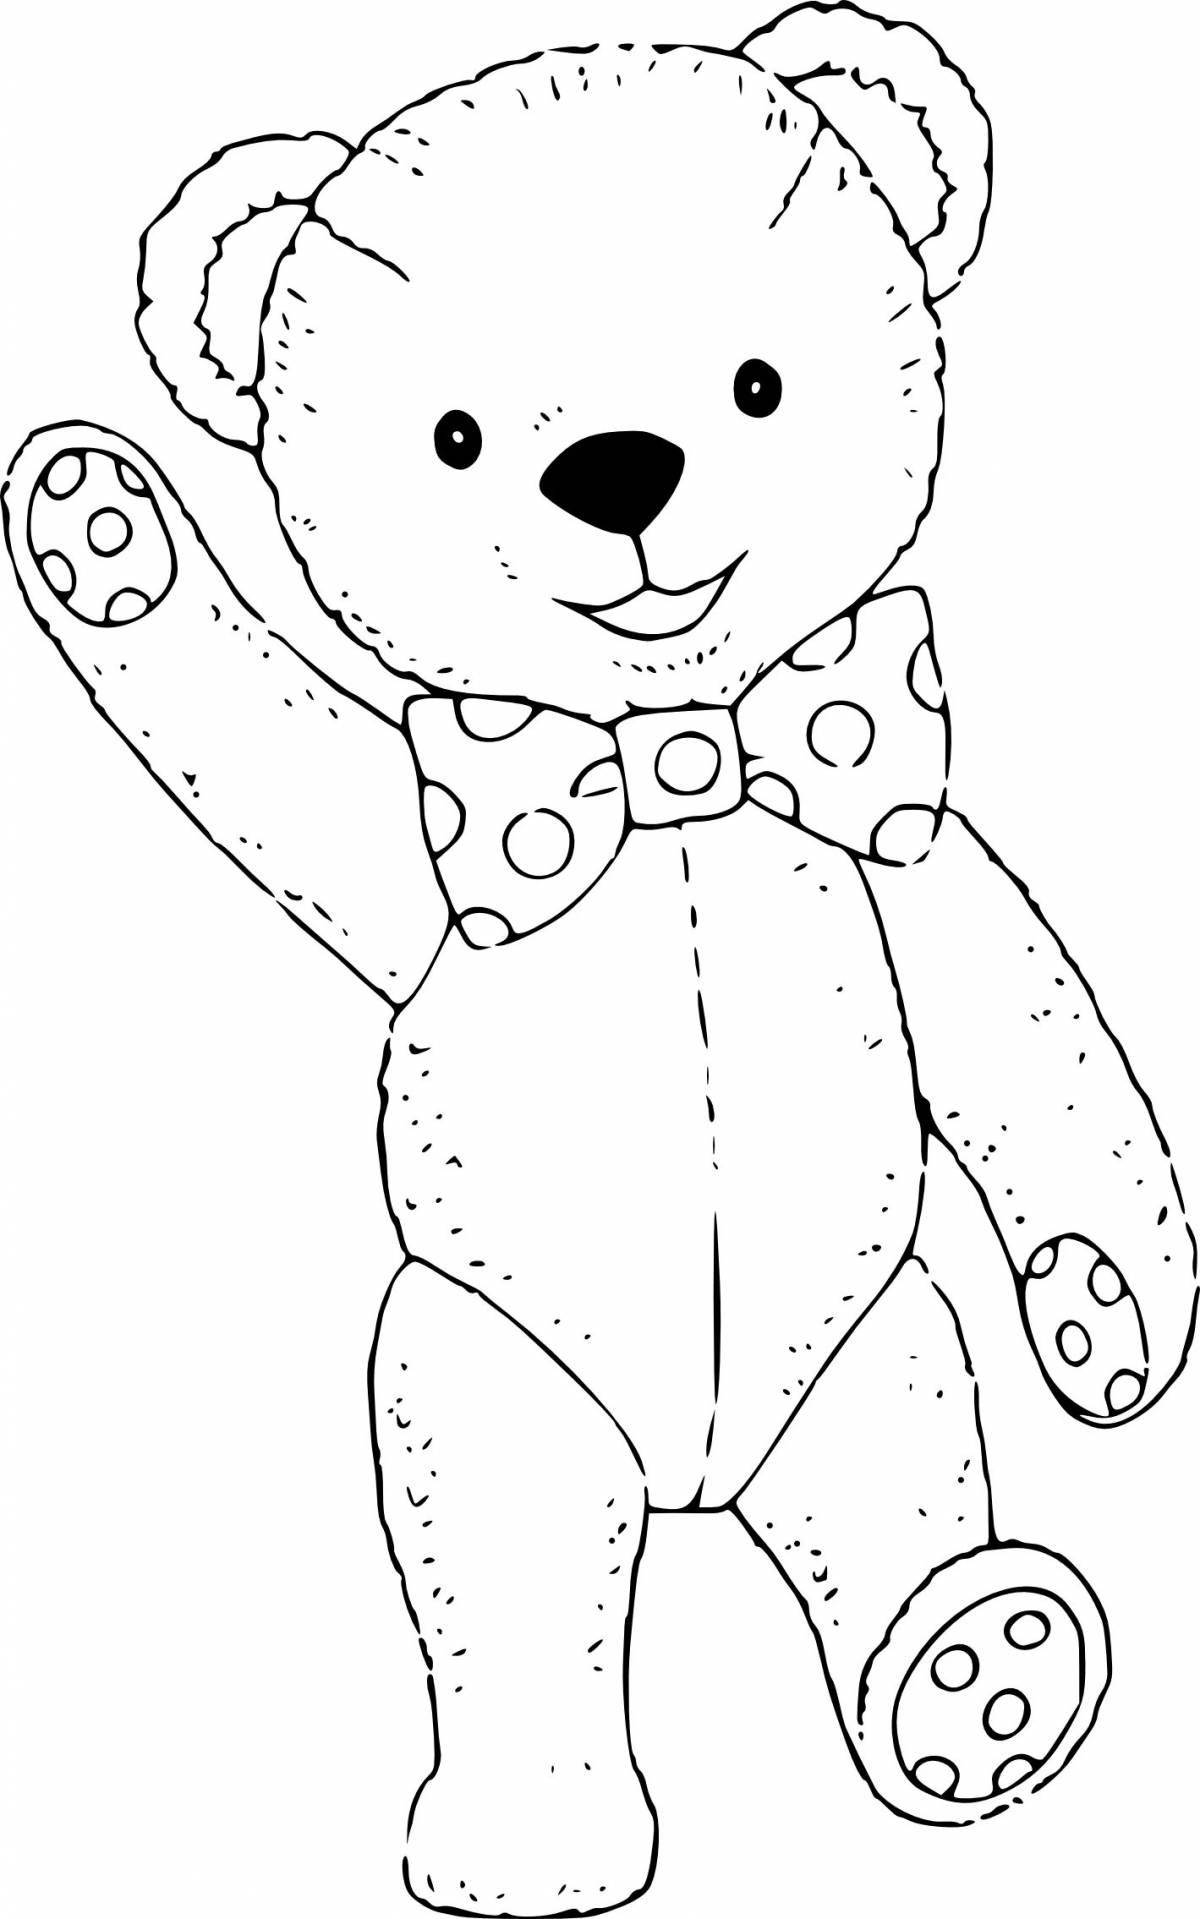 Cute as a button teddy bear in baby pants coloring book